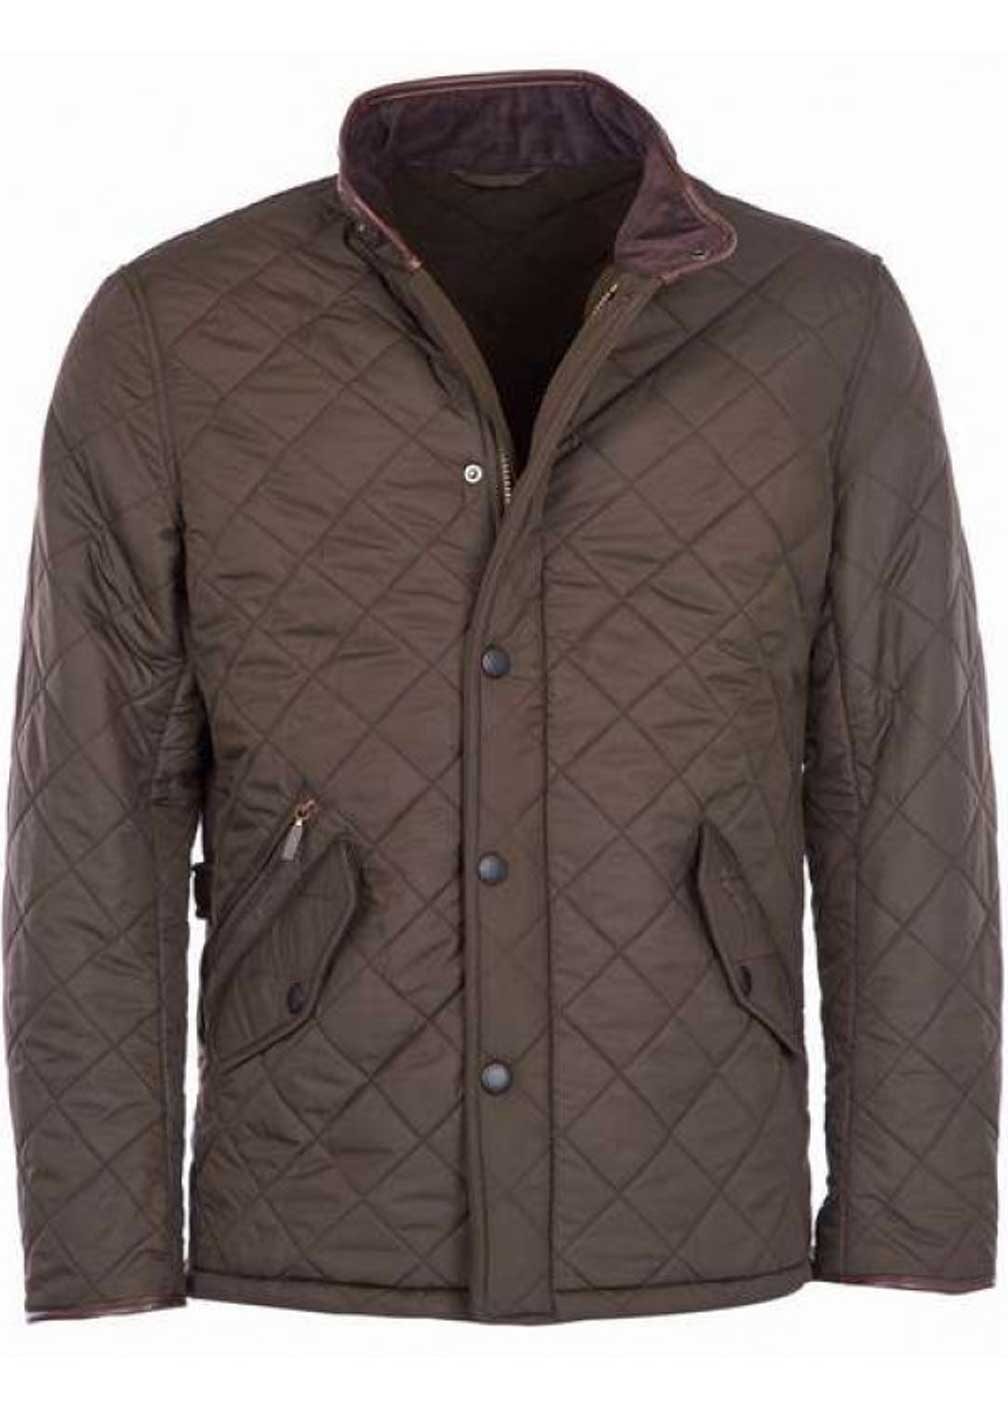 Barbour - Mens Powell Quilted Jacket with Fleece Lining - Olive